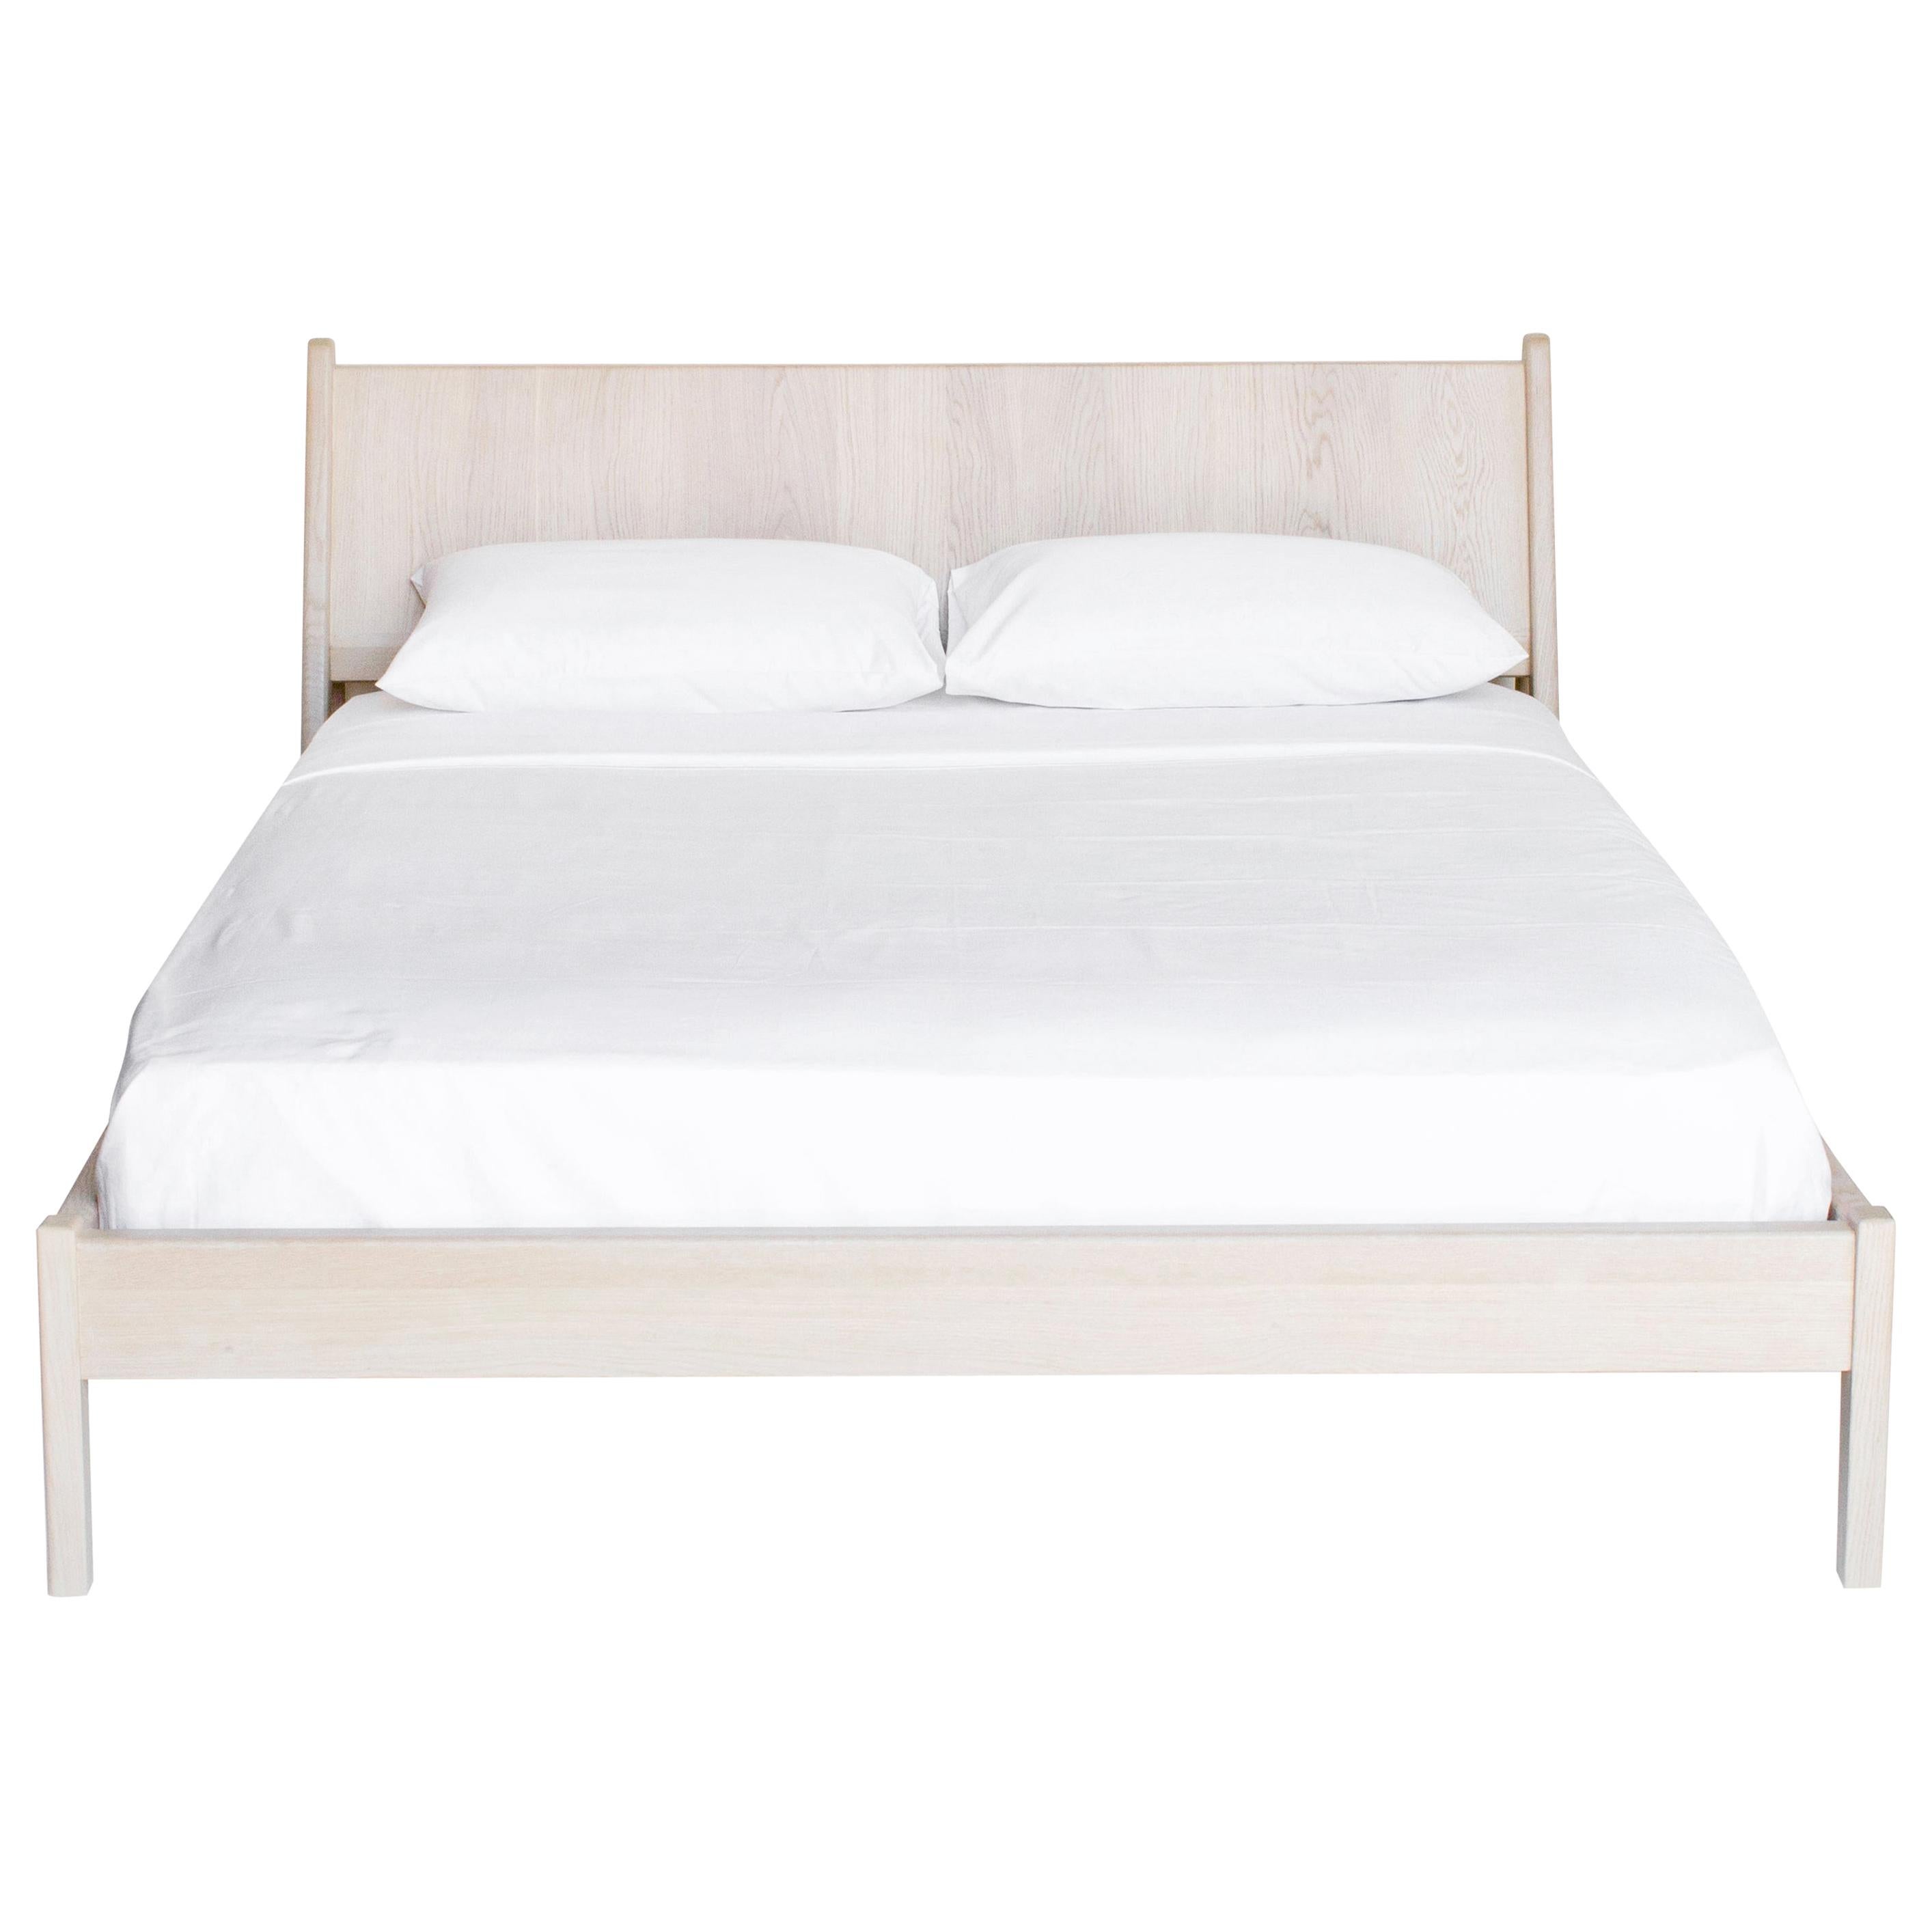 Plume Queen Bed in Nude by Sun at Six, Minimalist Wood Bed For Sale